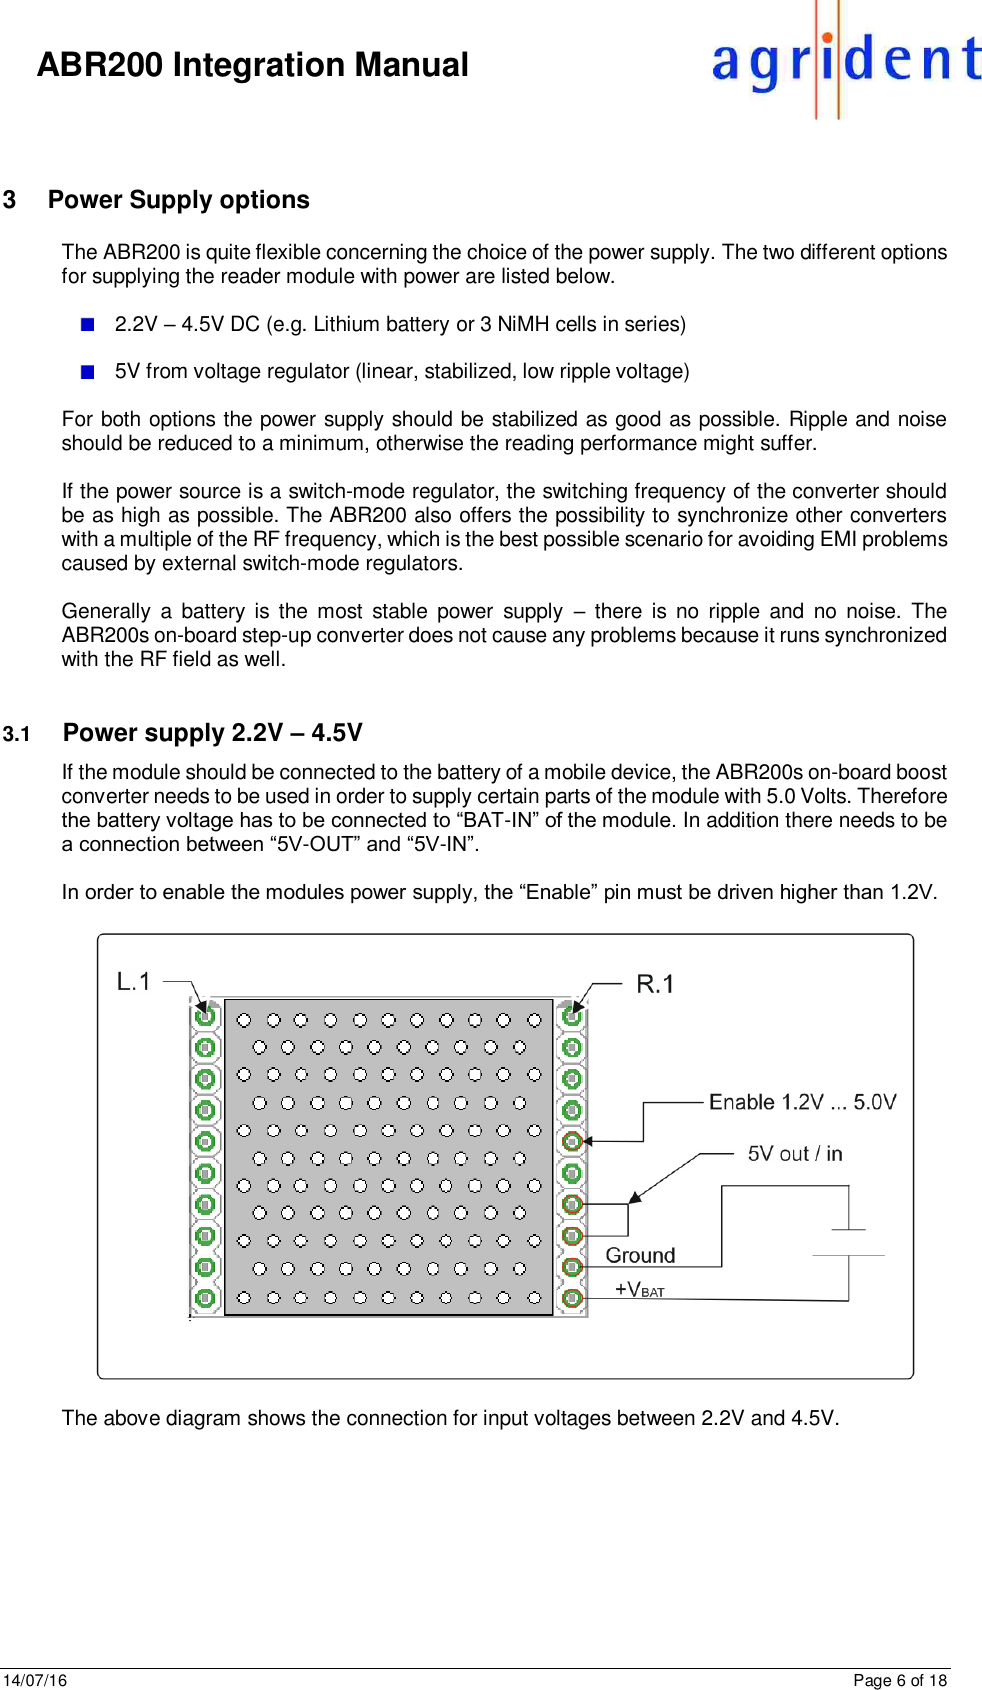 14/07/16      Page 6 of 18      ABR200 Integration Manual  3  Power Supply options The ABR200 is quite flexible concerning the choice of the power supply. The two different options for supplying the reader module with power are listed below.   2.2V – 4.5V DC (e.g. Lithium battery or 3 NiMH cells in series)     5V from voltage regulator (linear, stabilized, low ripple voltage)  For both options the power supply should be stabilized as good as possible. Ripple and noise should be reduced to a minimum, otherwise the reading performance might suffer.   If the power source is a switch-mode regulator, the switching frequency of the converter should be as high as possible. The ABR200 also offers the possibility to synchronize other converters with a multiple of the RF frequency, which is the best possible scenario for avoiding EMI problems caused by external switch-mode regulators.   Generally  a  battery  is the  most  stable  power  supply  –  there is  no  ripple  and  no  noise.  The ABR200s on-board step-up converter does not cause any problems because it runs synchronized with the RF field as well.   3.1  Power supply 2.2V – 4.5V If the module should be connected to the battery of a mobile device, the ABR200s on-board boost converter needs to be used in order to supply certain parts of the module with 5.0 Volts. Therefore the battery voltage has to be connected to “BAT-IN” of the module. In addition there needs to be a connection between “5V-OUT” and “5V-IN”.   In order to enable the modules power supply, the “Enable” pin must be driven higher than 1.2V.     The above diagram shows the connection for input voltages between 2.2V and 4.5V.    